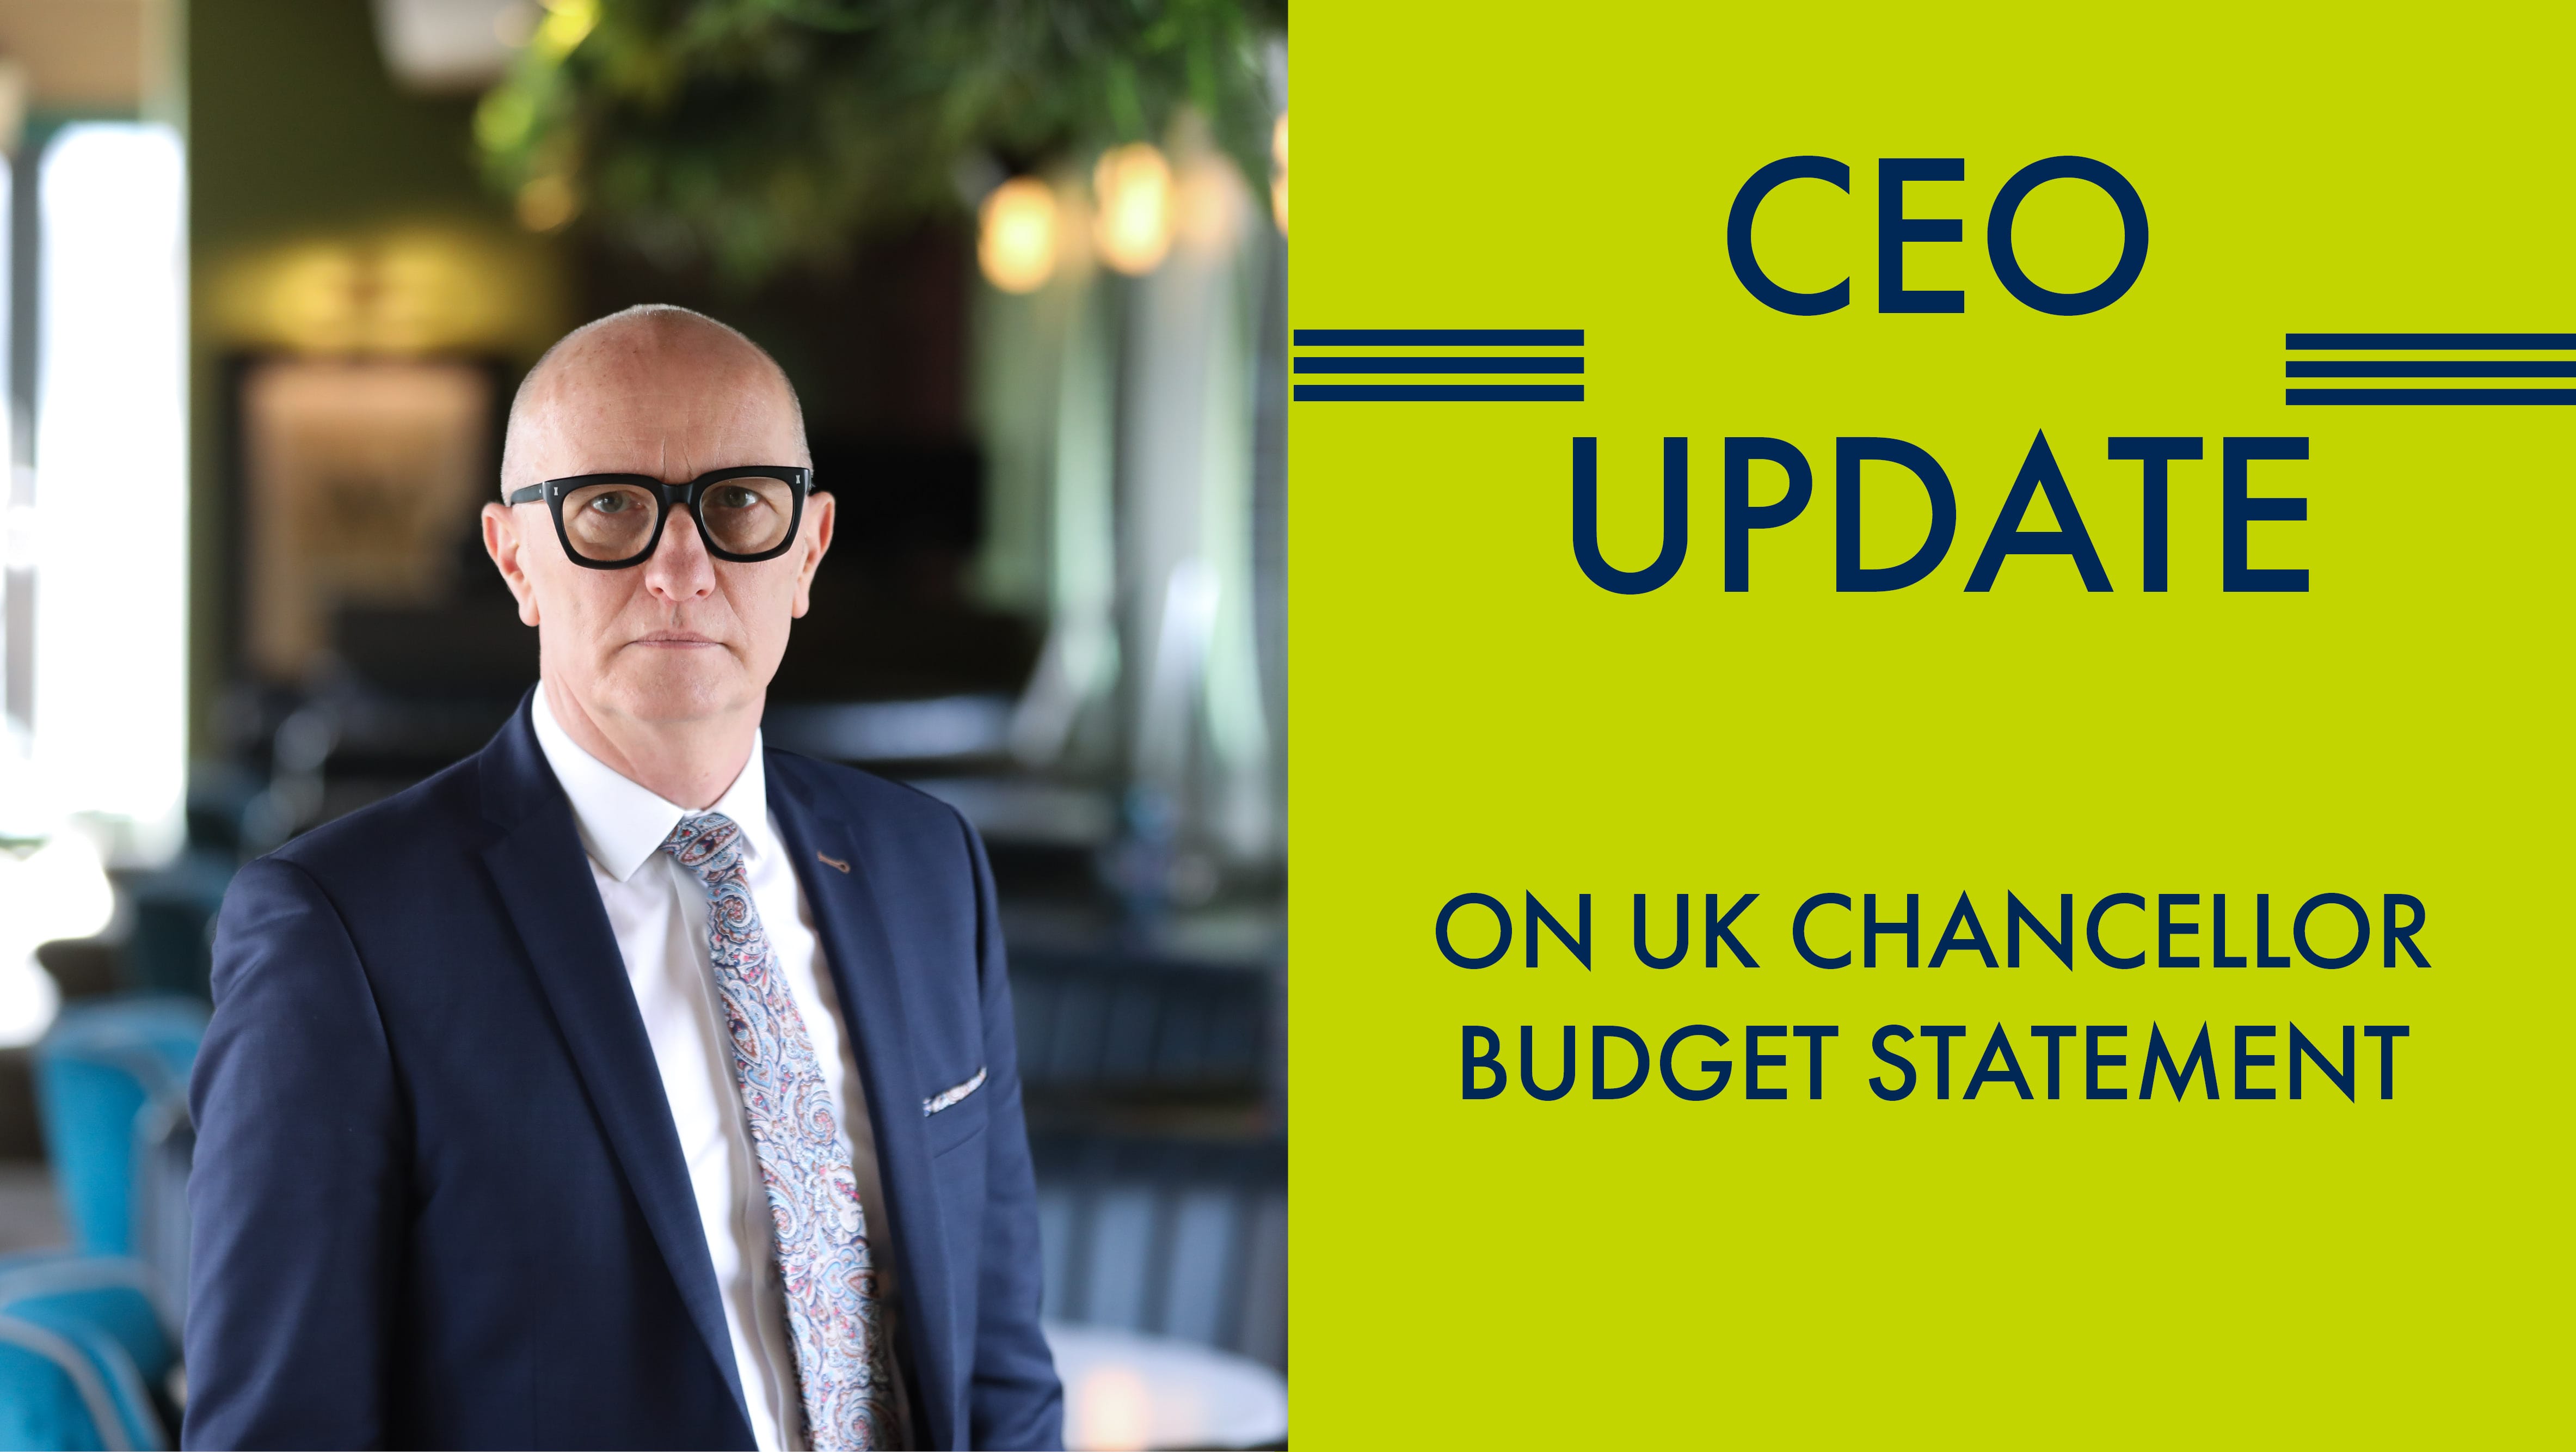 CEO UPDATE ON UK CHANCELLOR BUDGET STATEMENT